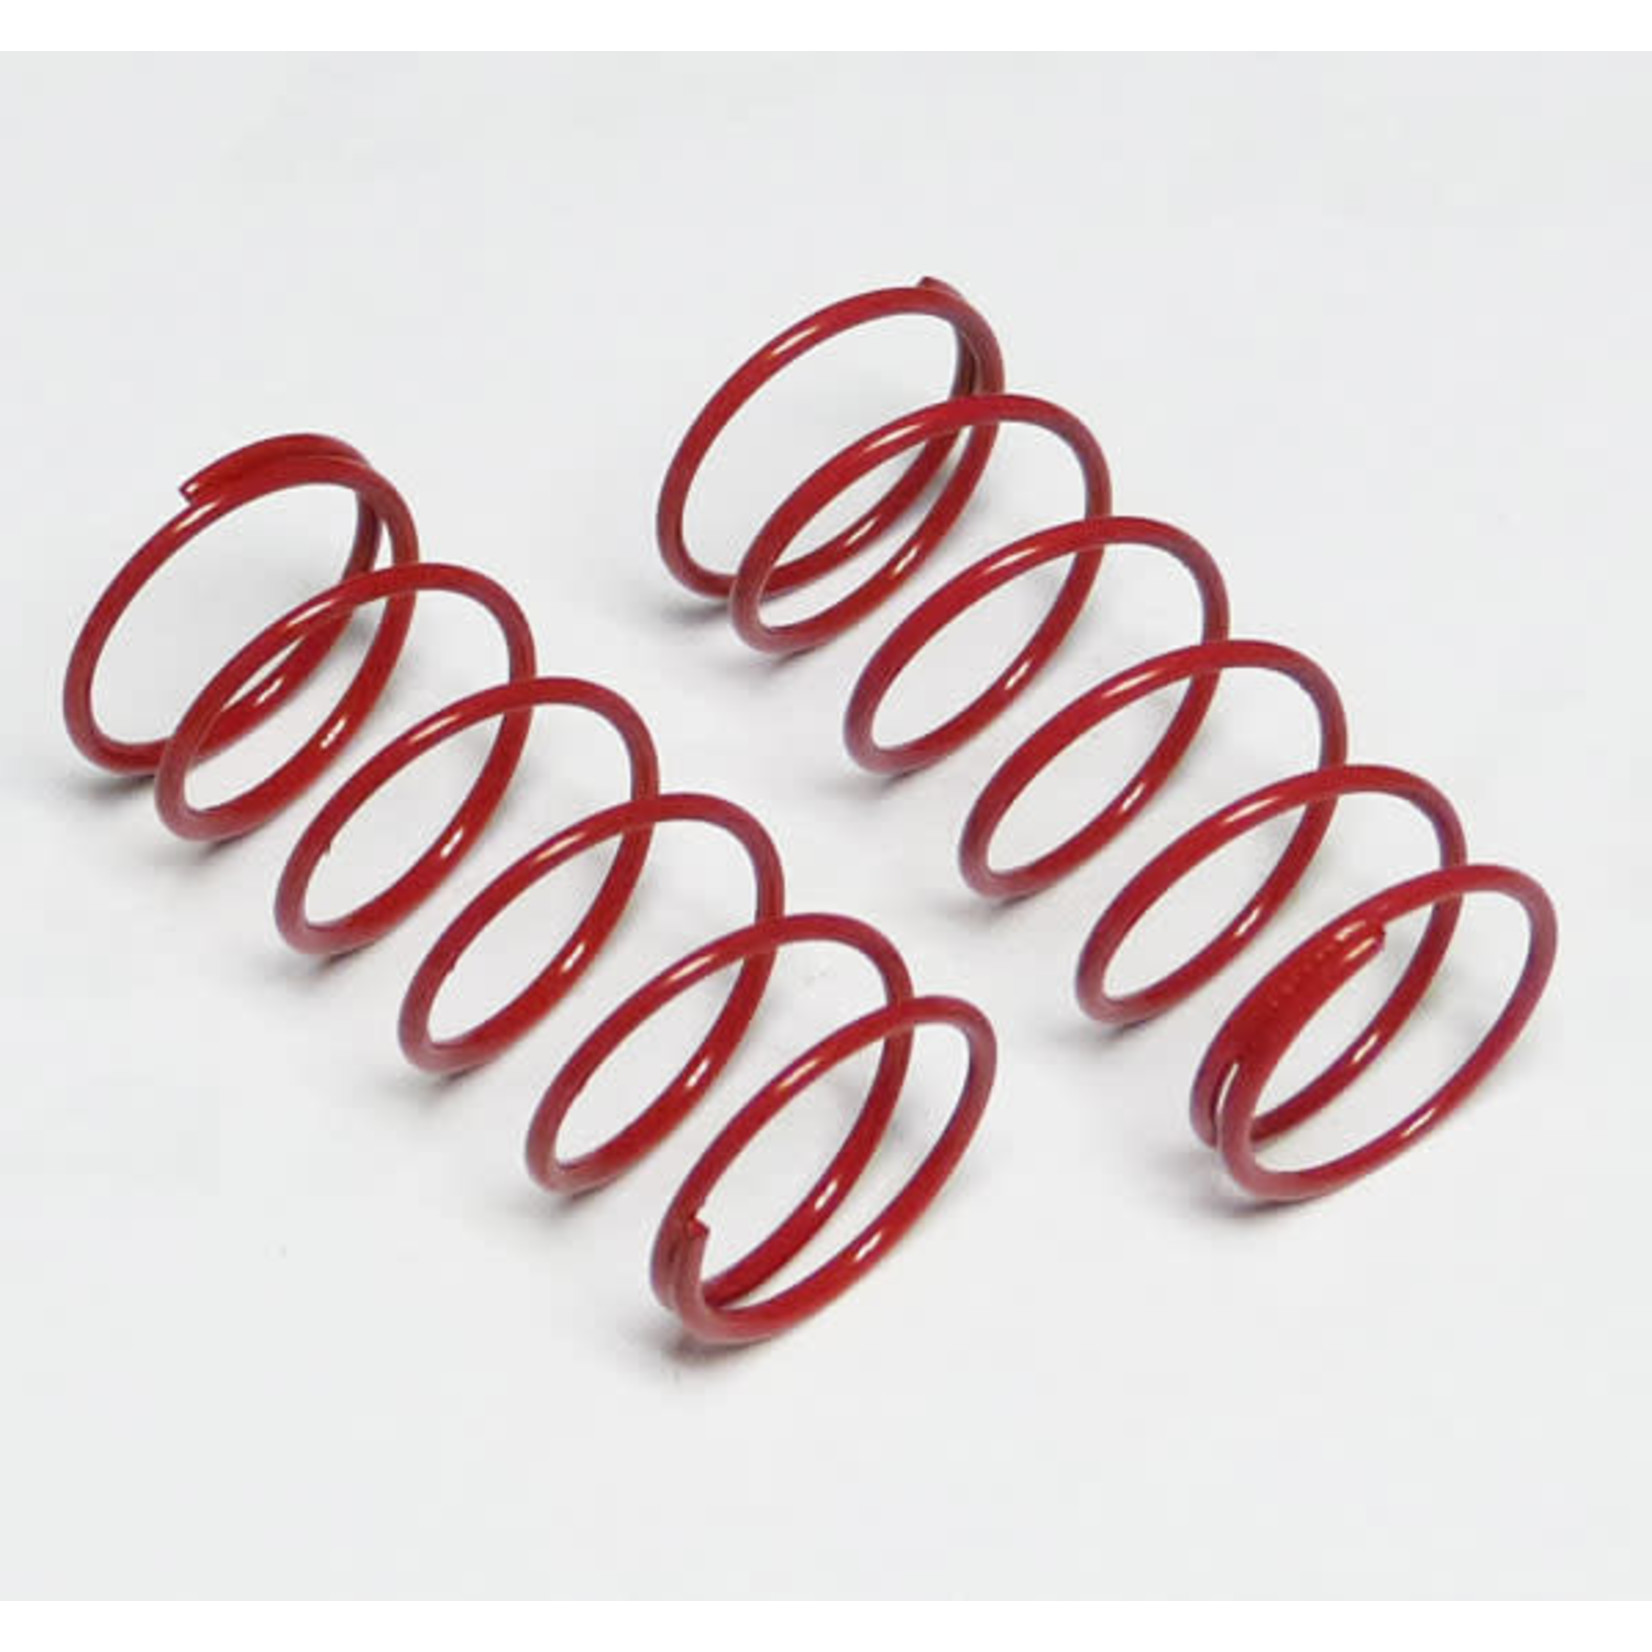 Custom Works RC Products CW1826 Custom Works Red Big Bore Spring 6lb